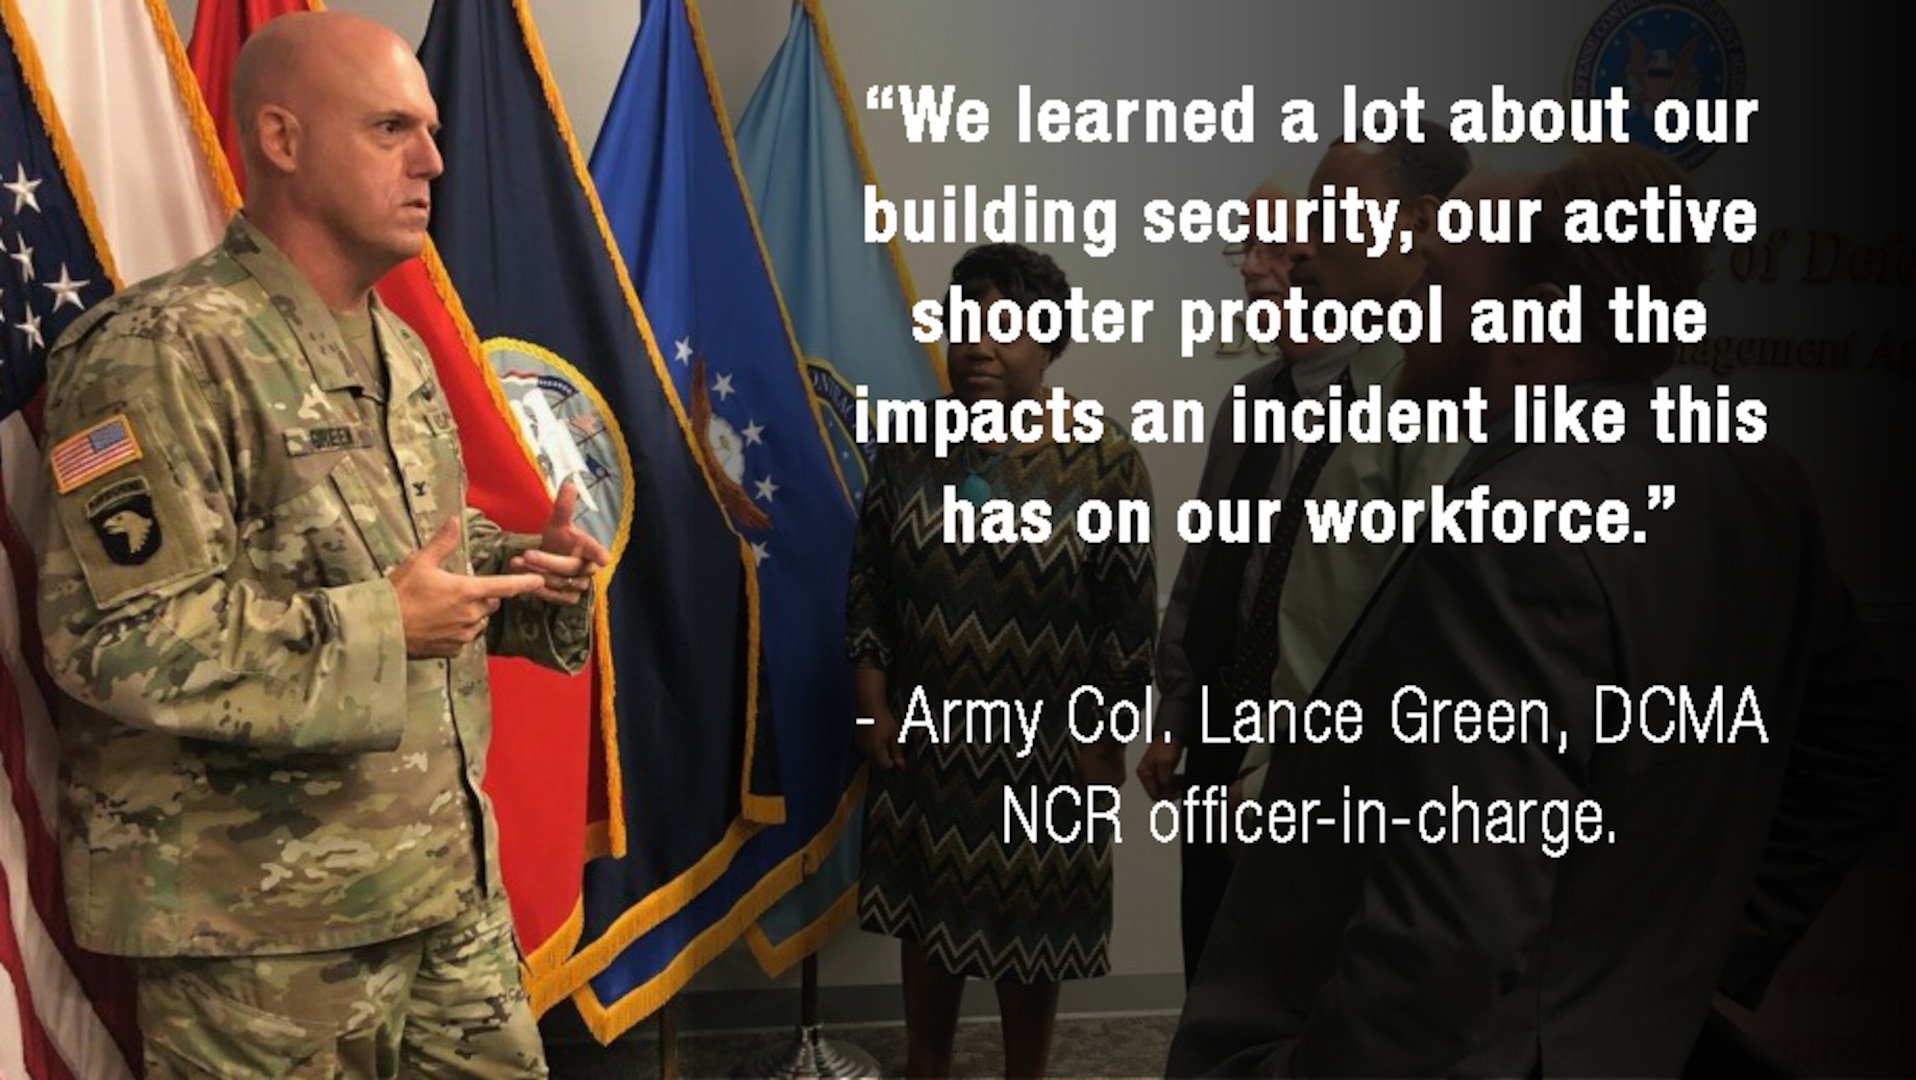 Army Col. Lance Green, DCMA NCR officer-in-charge, address a crowd during a training period.